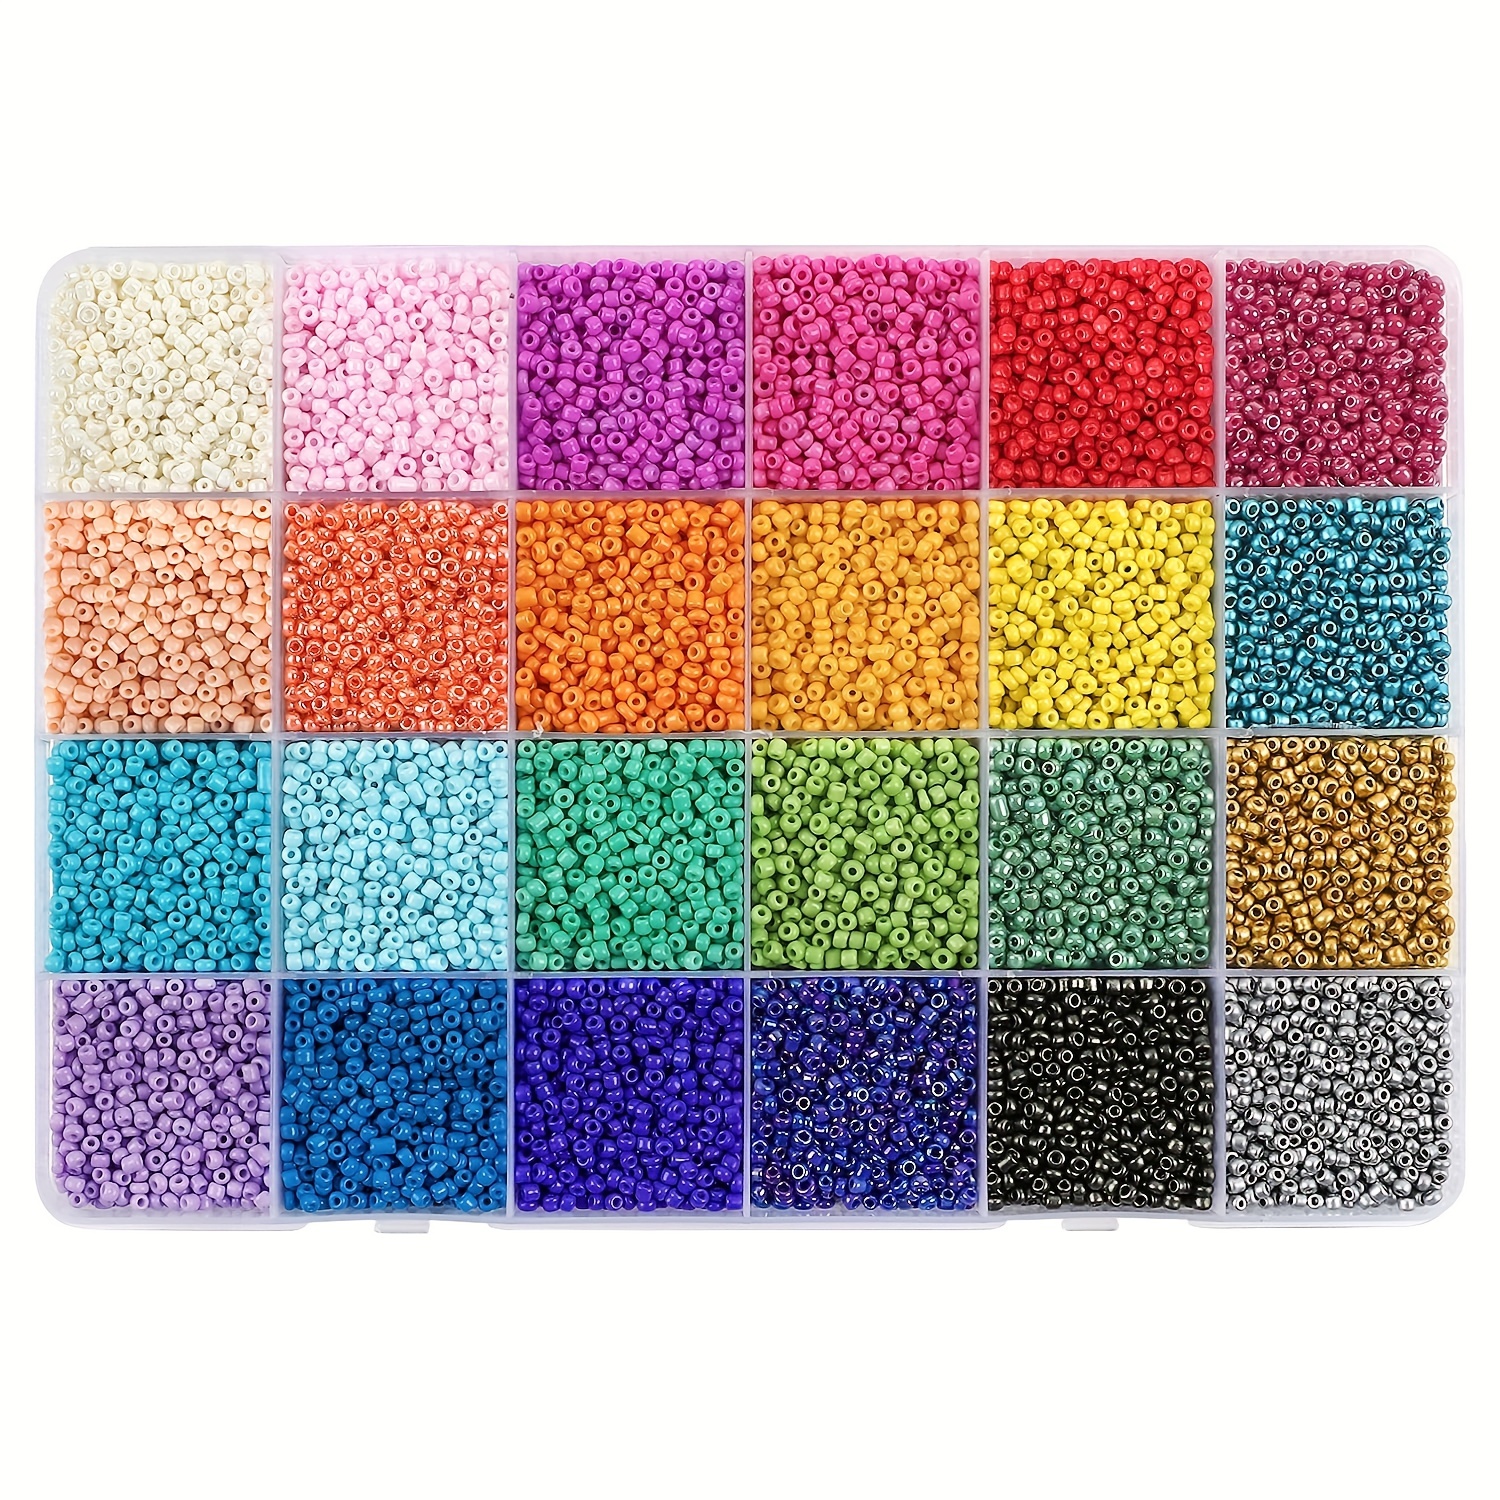 3mm Macaron Colored Rice Bead Alphabet Shaped Polymer Clay Beads 24-grid  Diy Set For Jewelry Making, Necklace & Bracelet